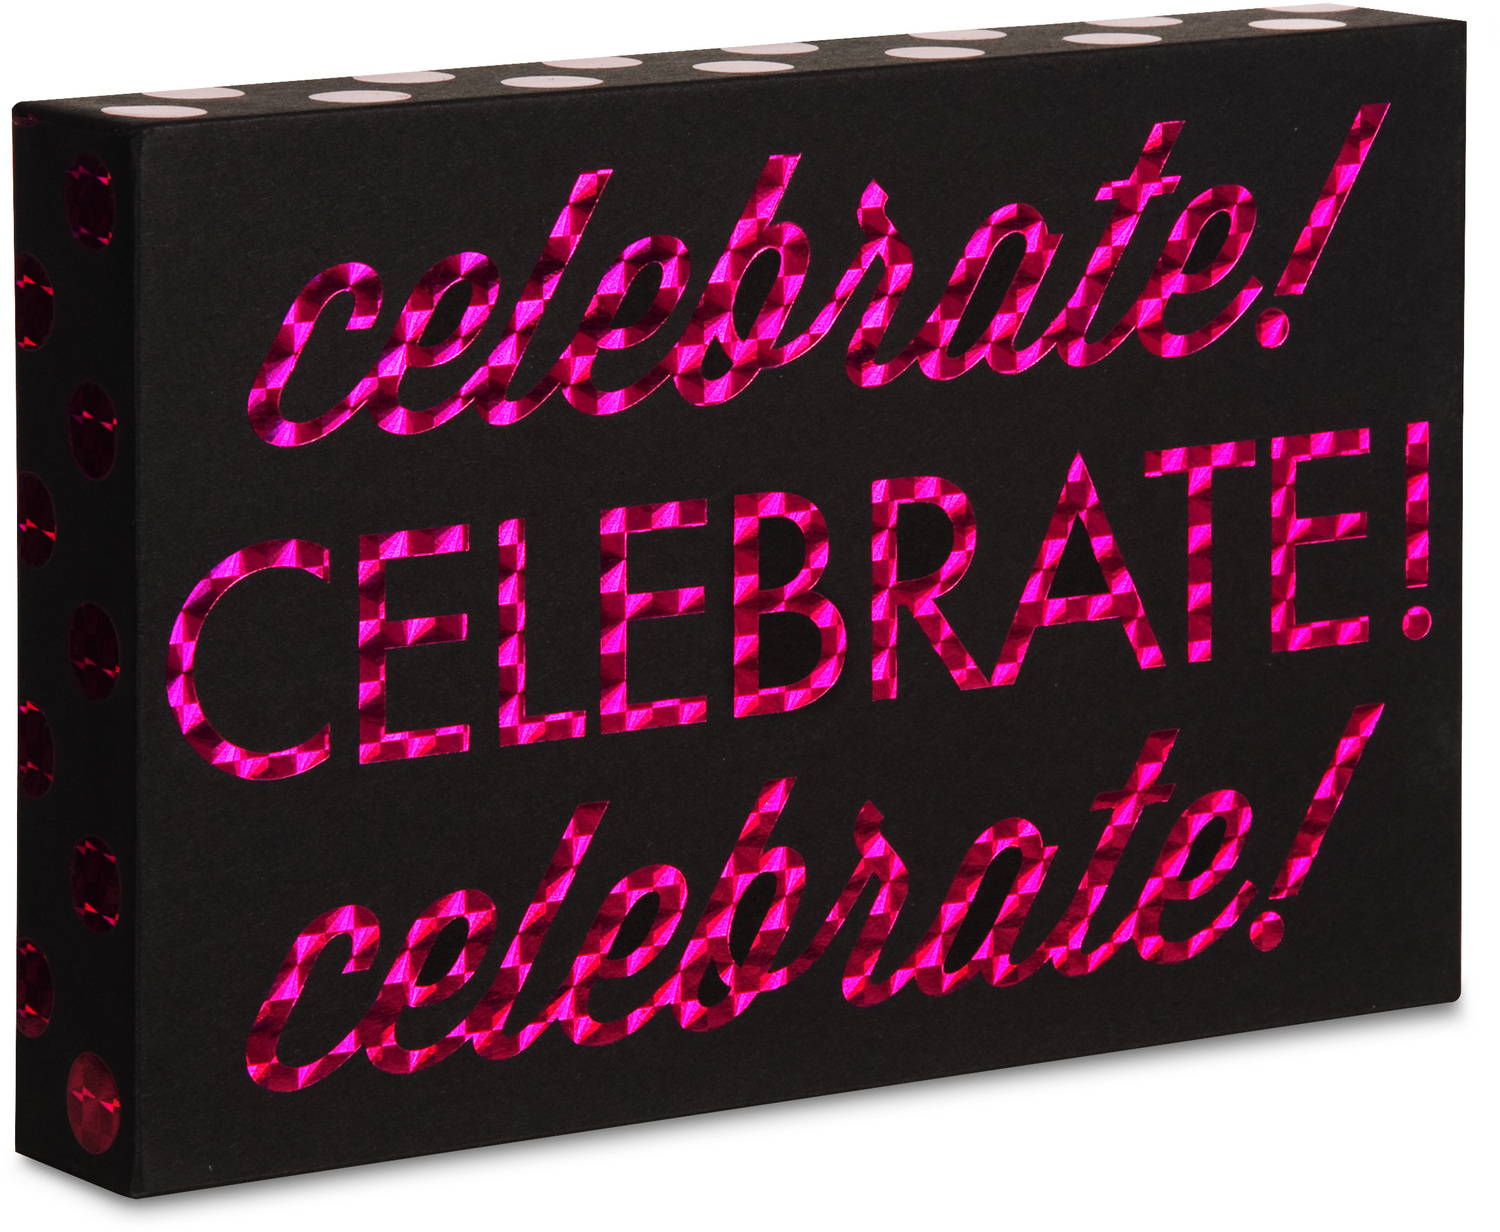 Celebrate by Hiccup - Celebrate - 6" x 4" Plaque